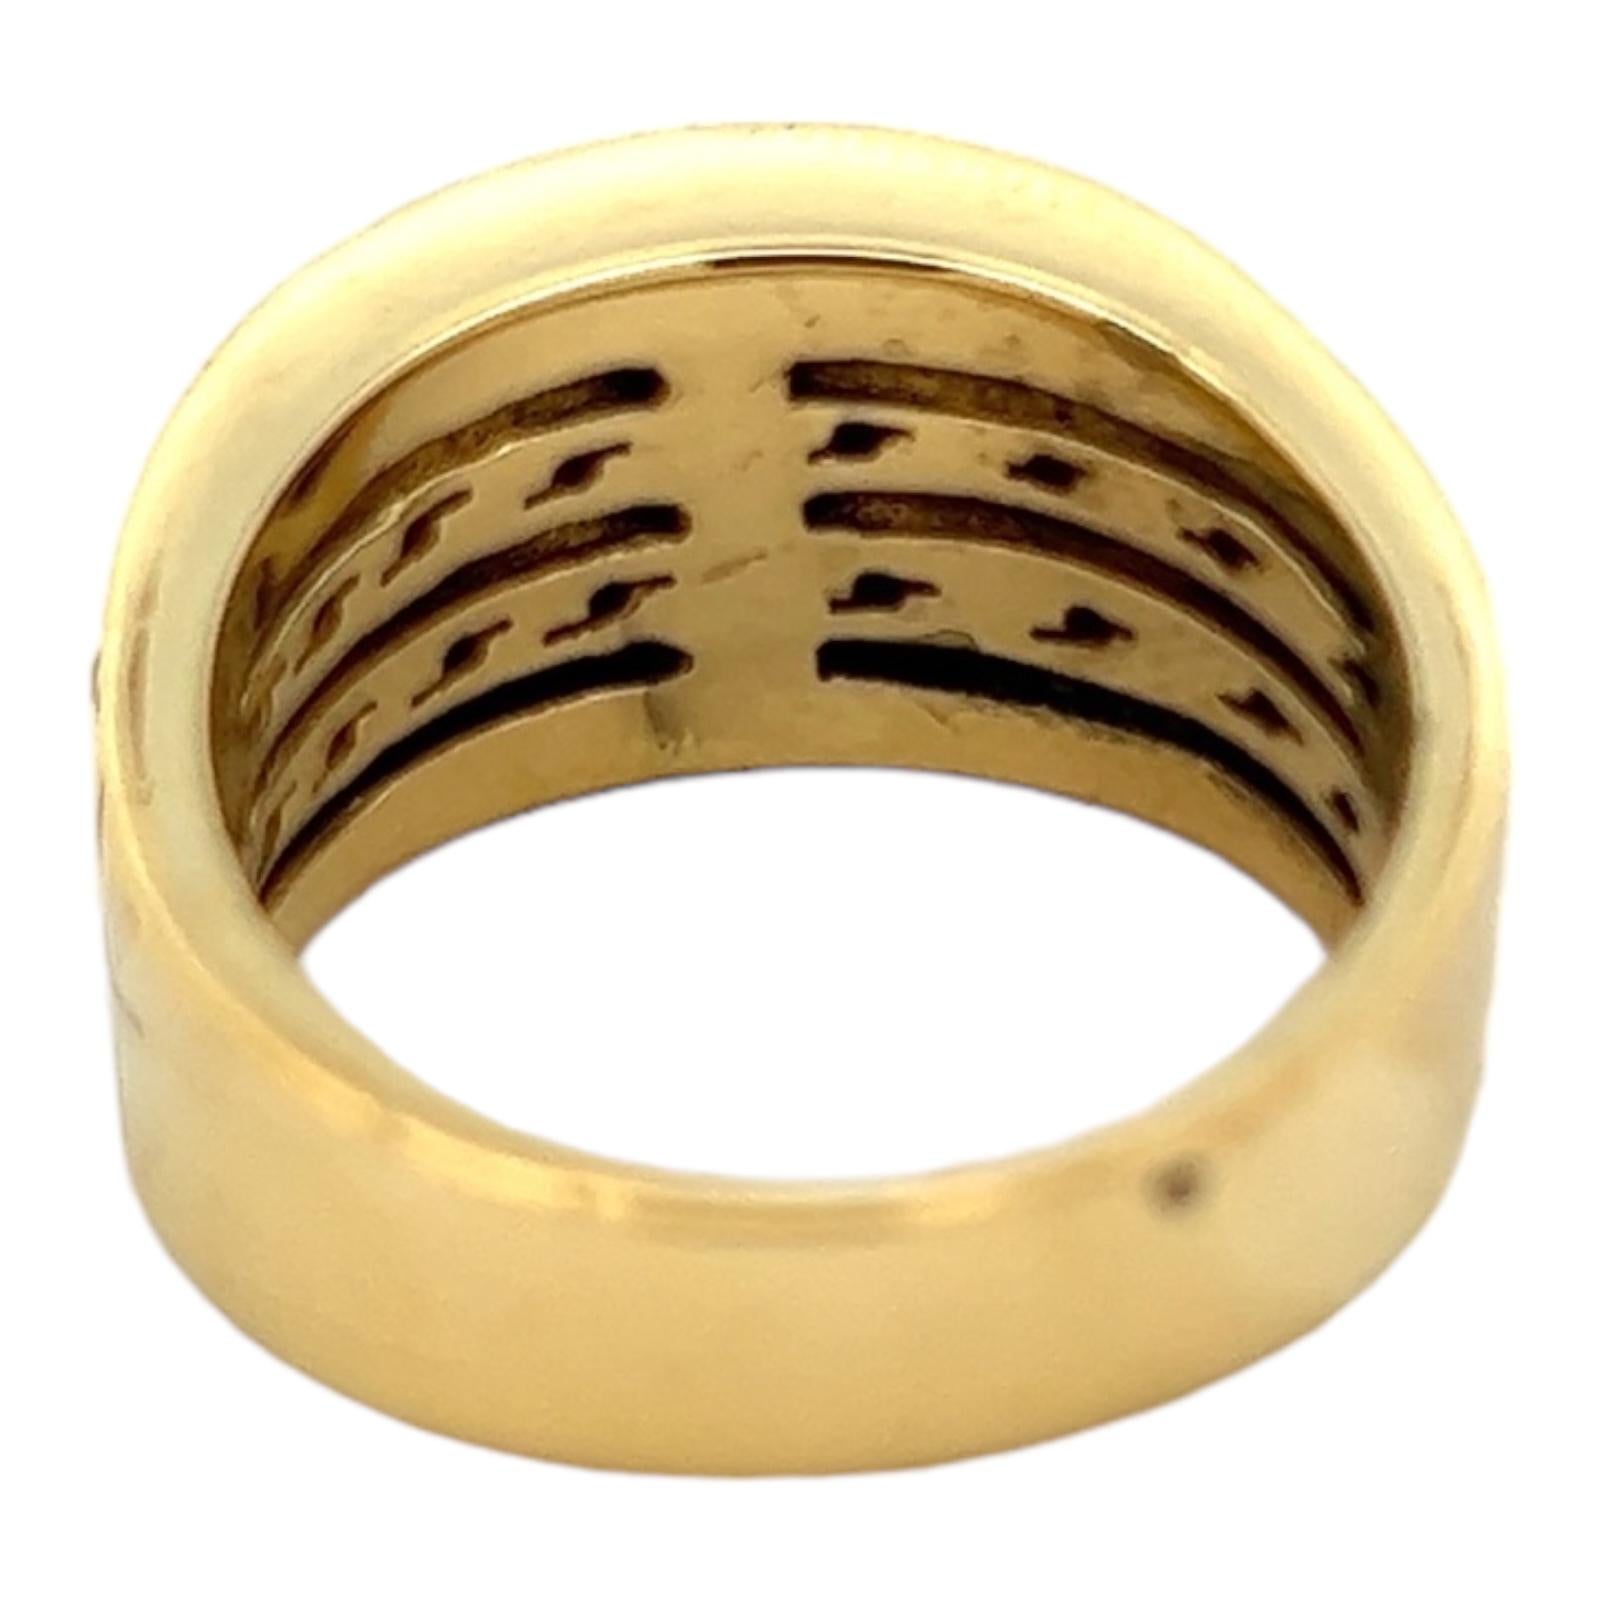 Diamond cigar band crafted in textured 18 karat yellow gold. The band features 36 round brilliant cut diamonds weighing approximately .76 CTW and graded G-I color and SI clarity. The ring measures 12mm in width and is currently size 8.5 (can be